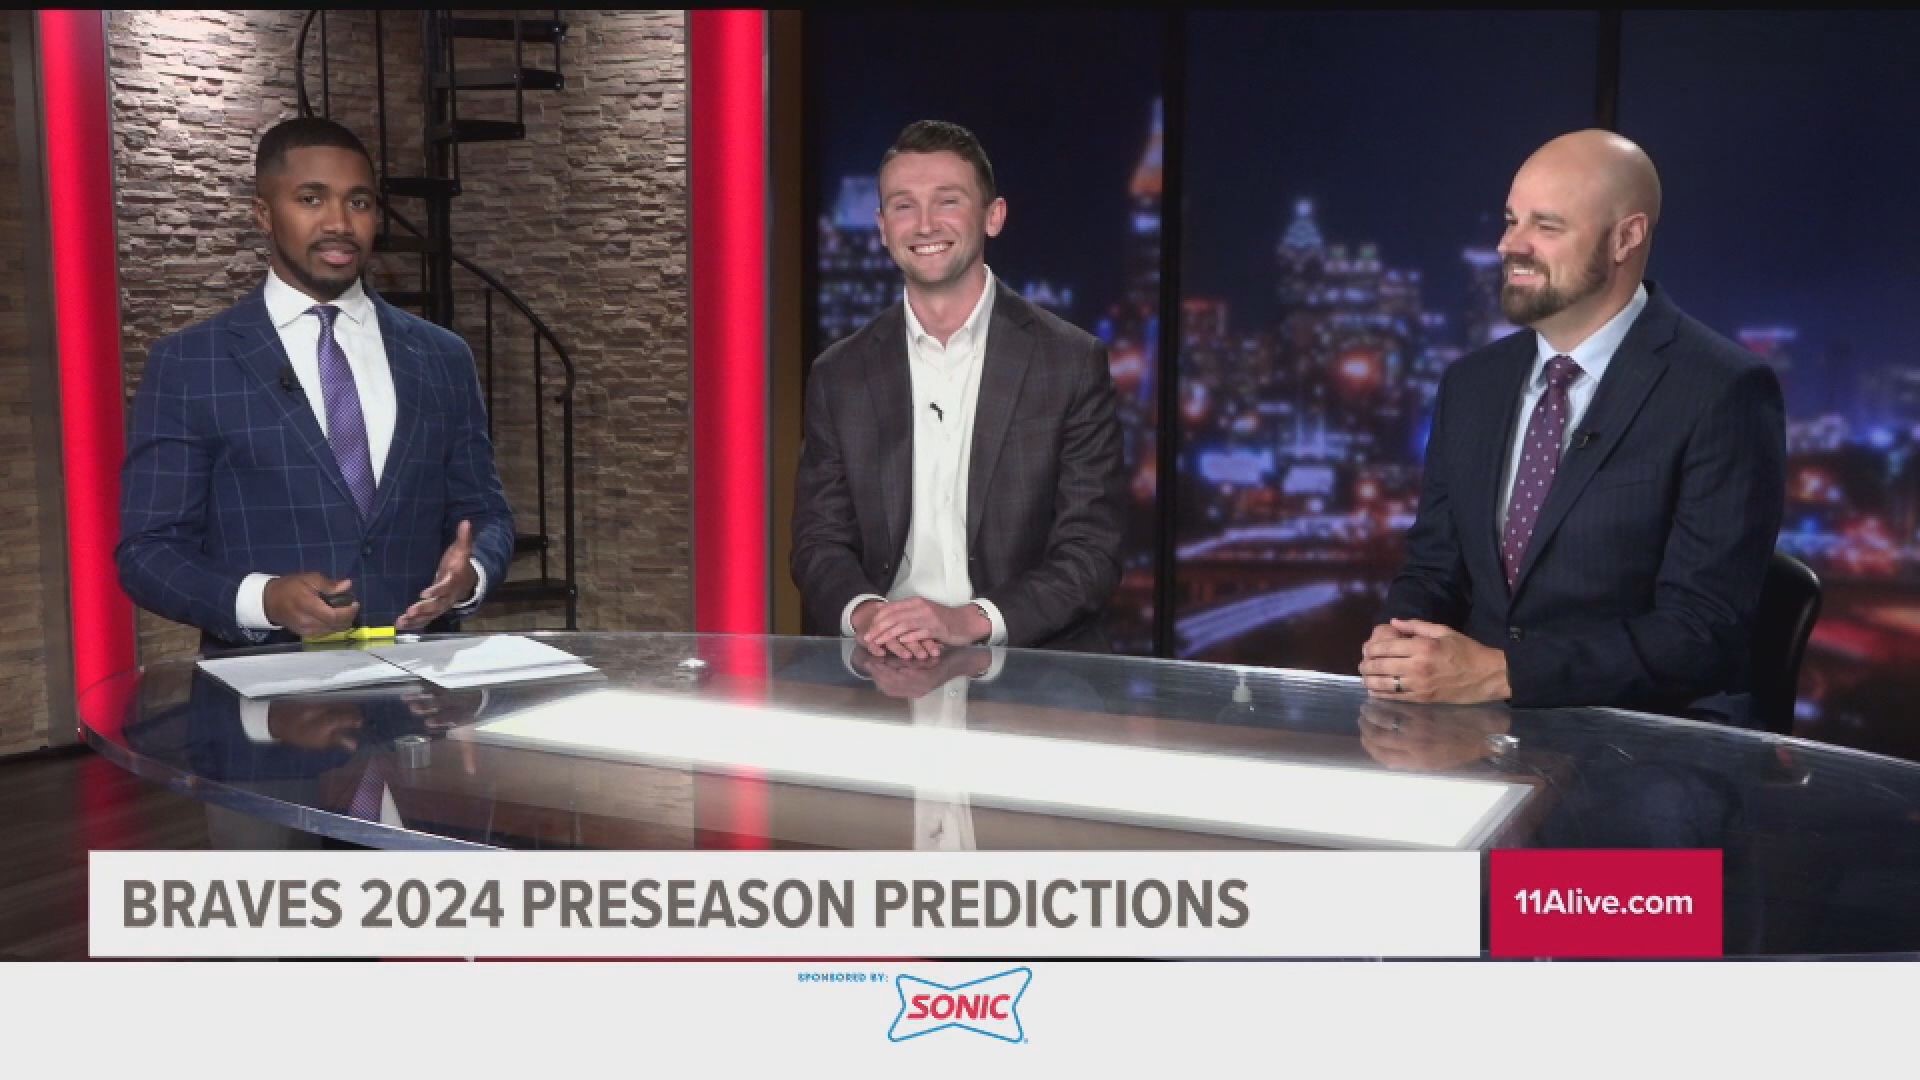 11Alive's Reggie Chatman and Reeves Jackson, along with 92.9 The Game's Grant McAuley got together to make some predictions for the Braves this season.